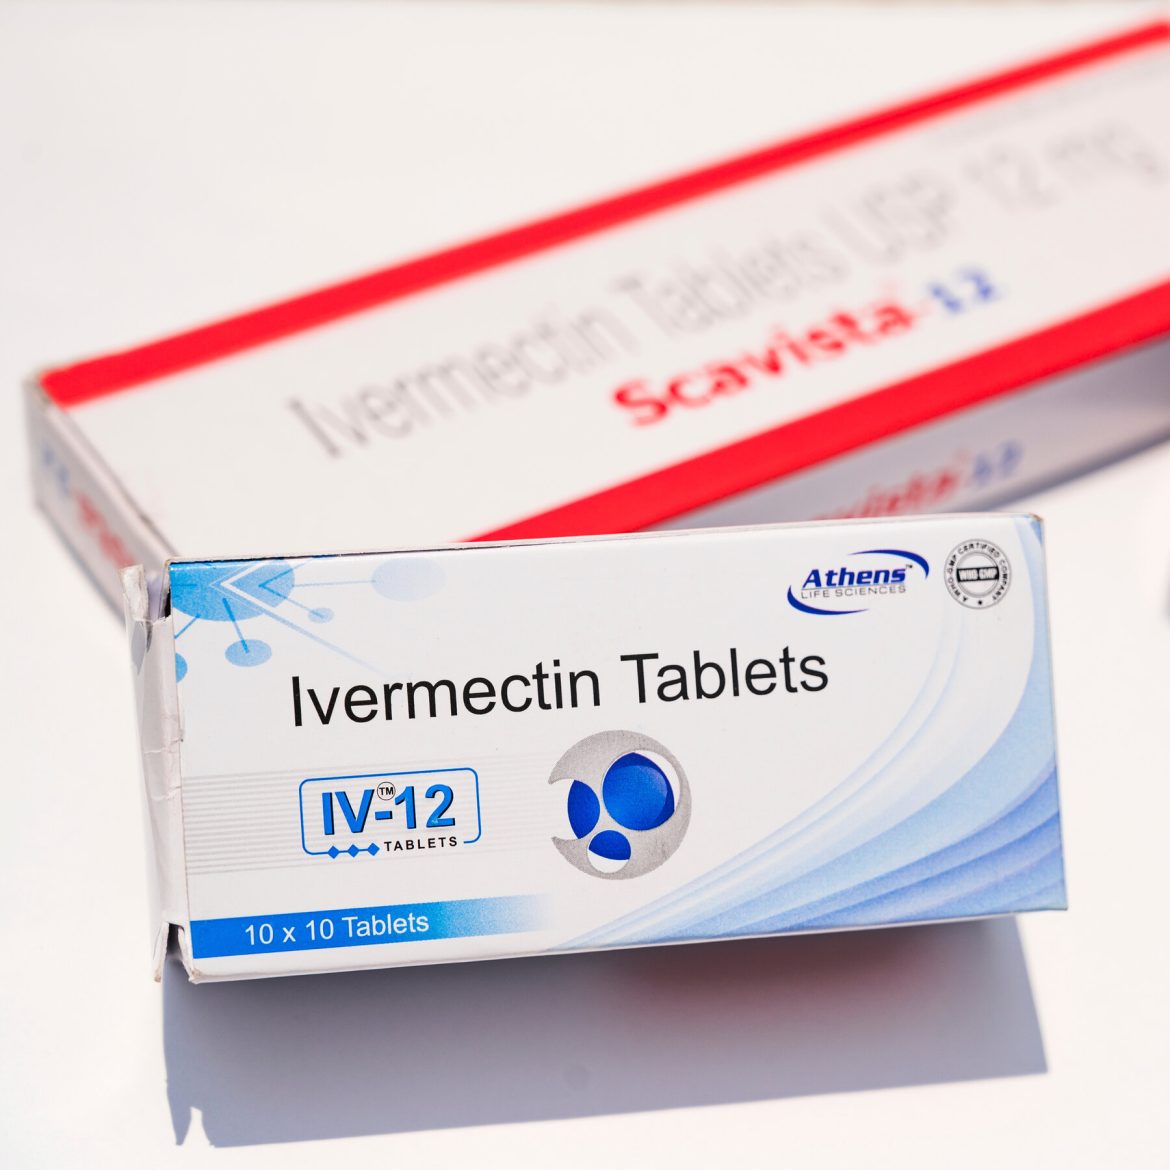 How Ivermectin 12 mg Can Help Treat Parasitic Infections?